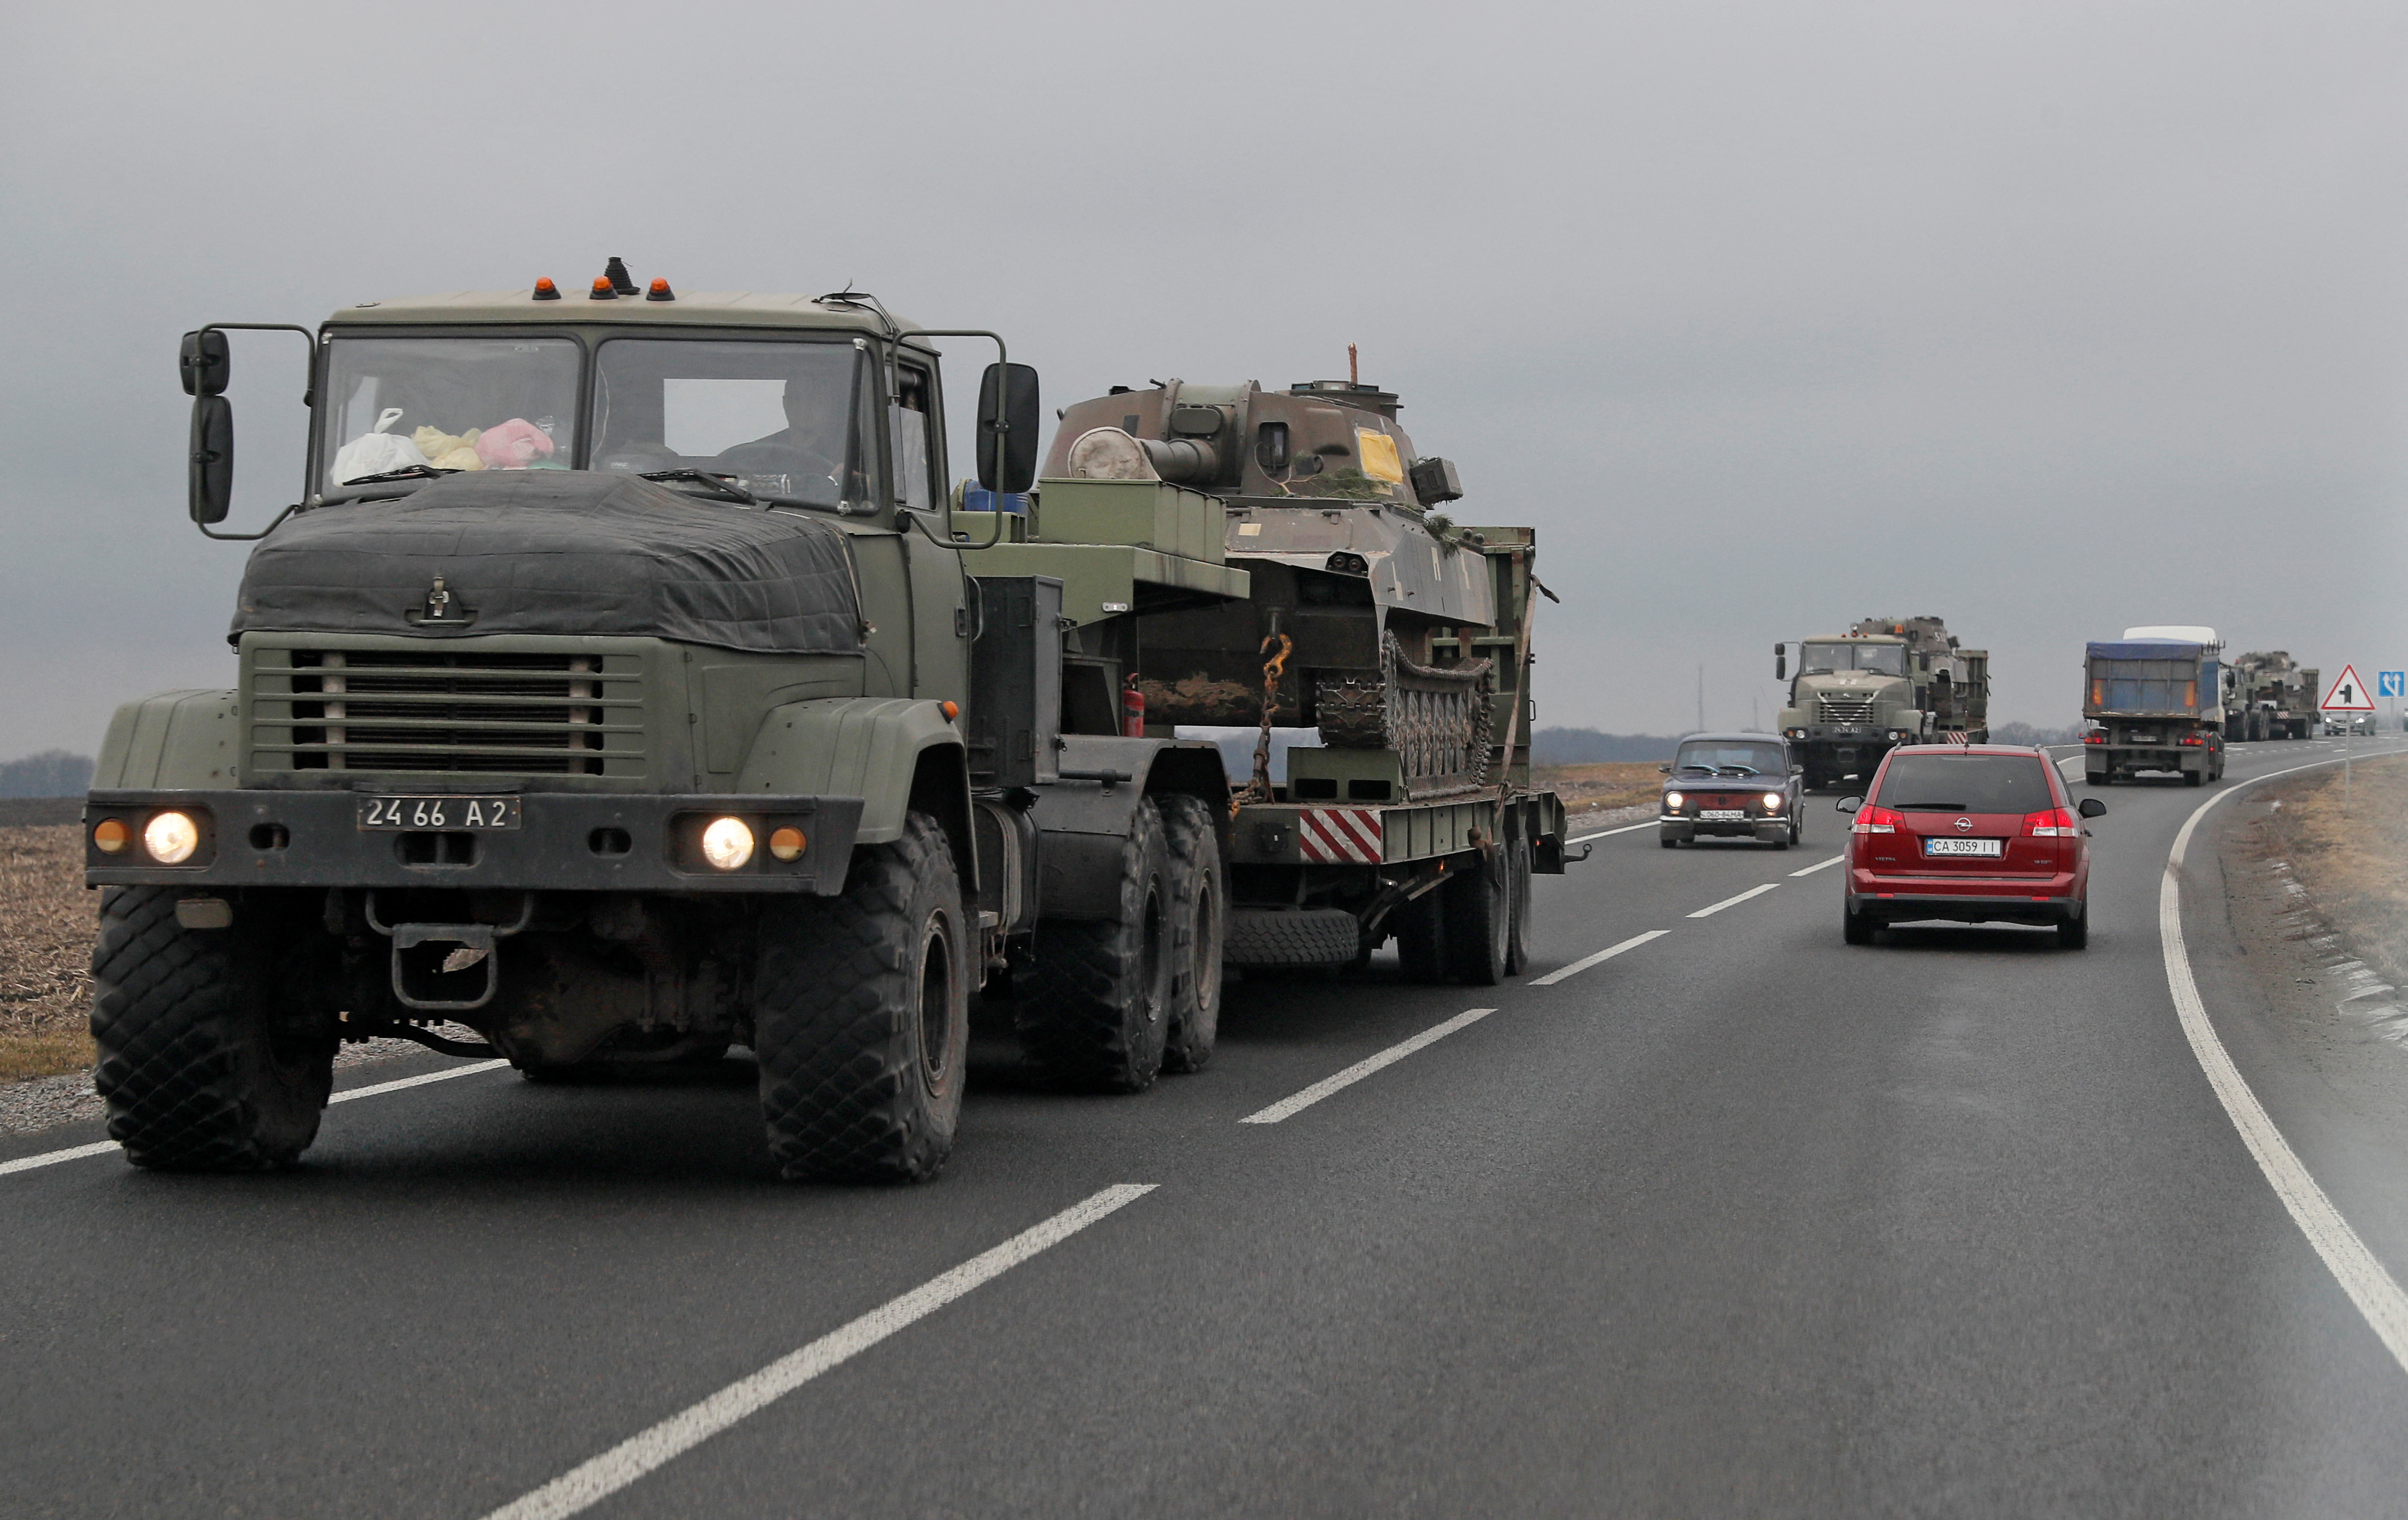 Trucks of the Ukrainian Armed Forces transport armoured vehicles in the Kyiv region